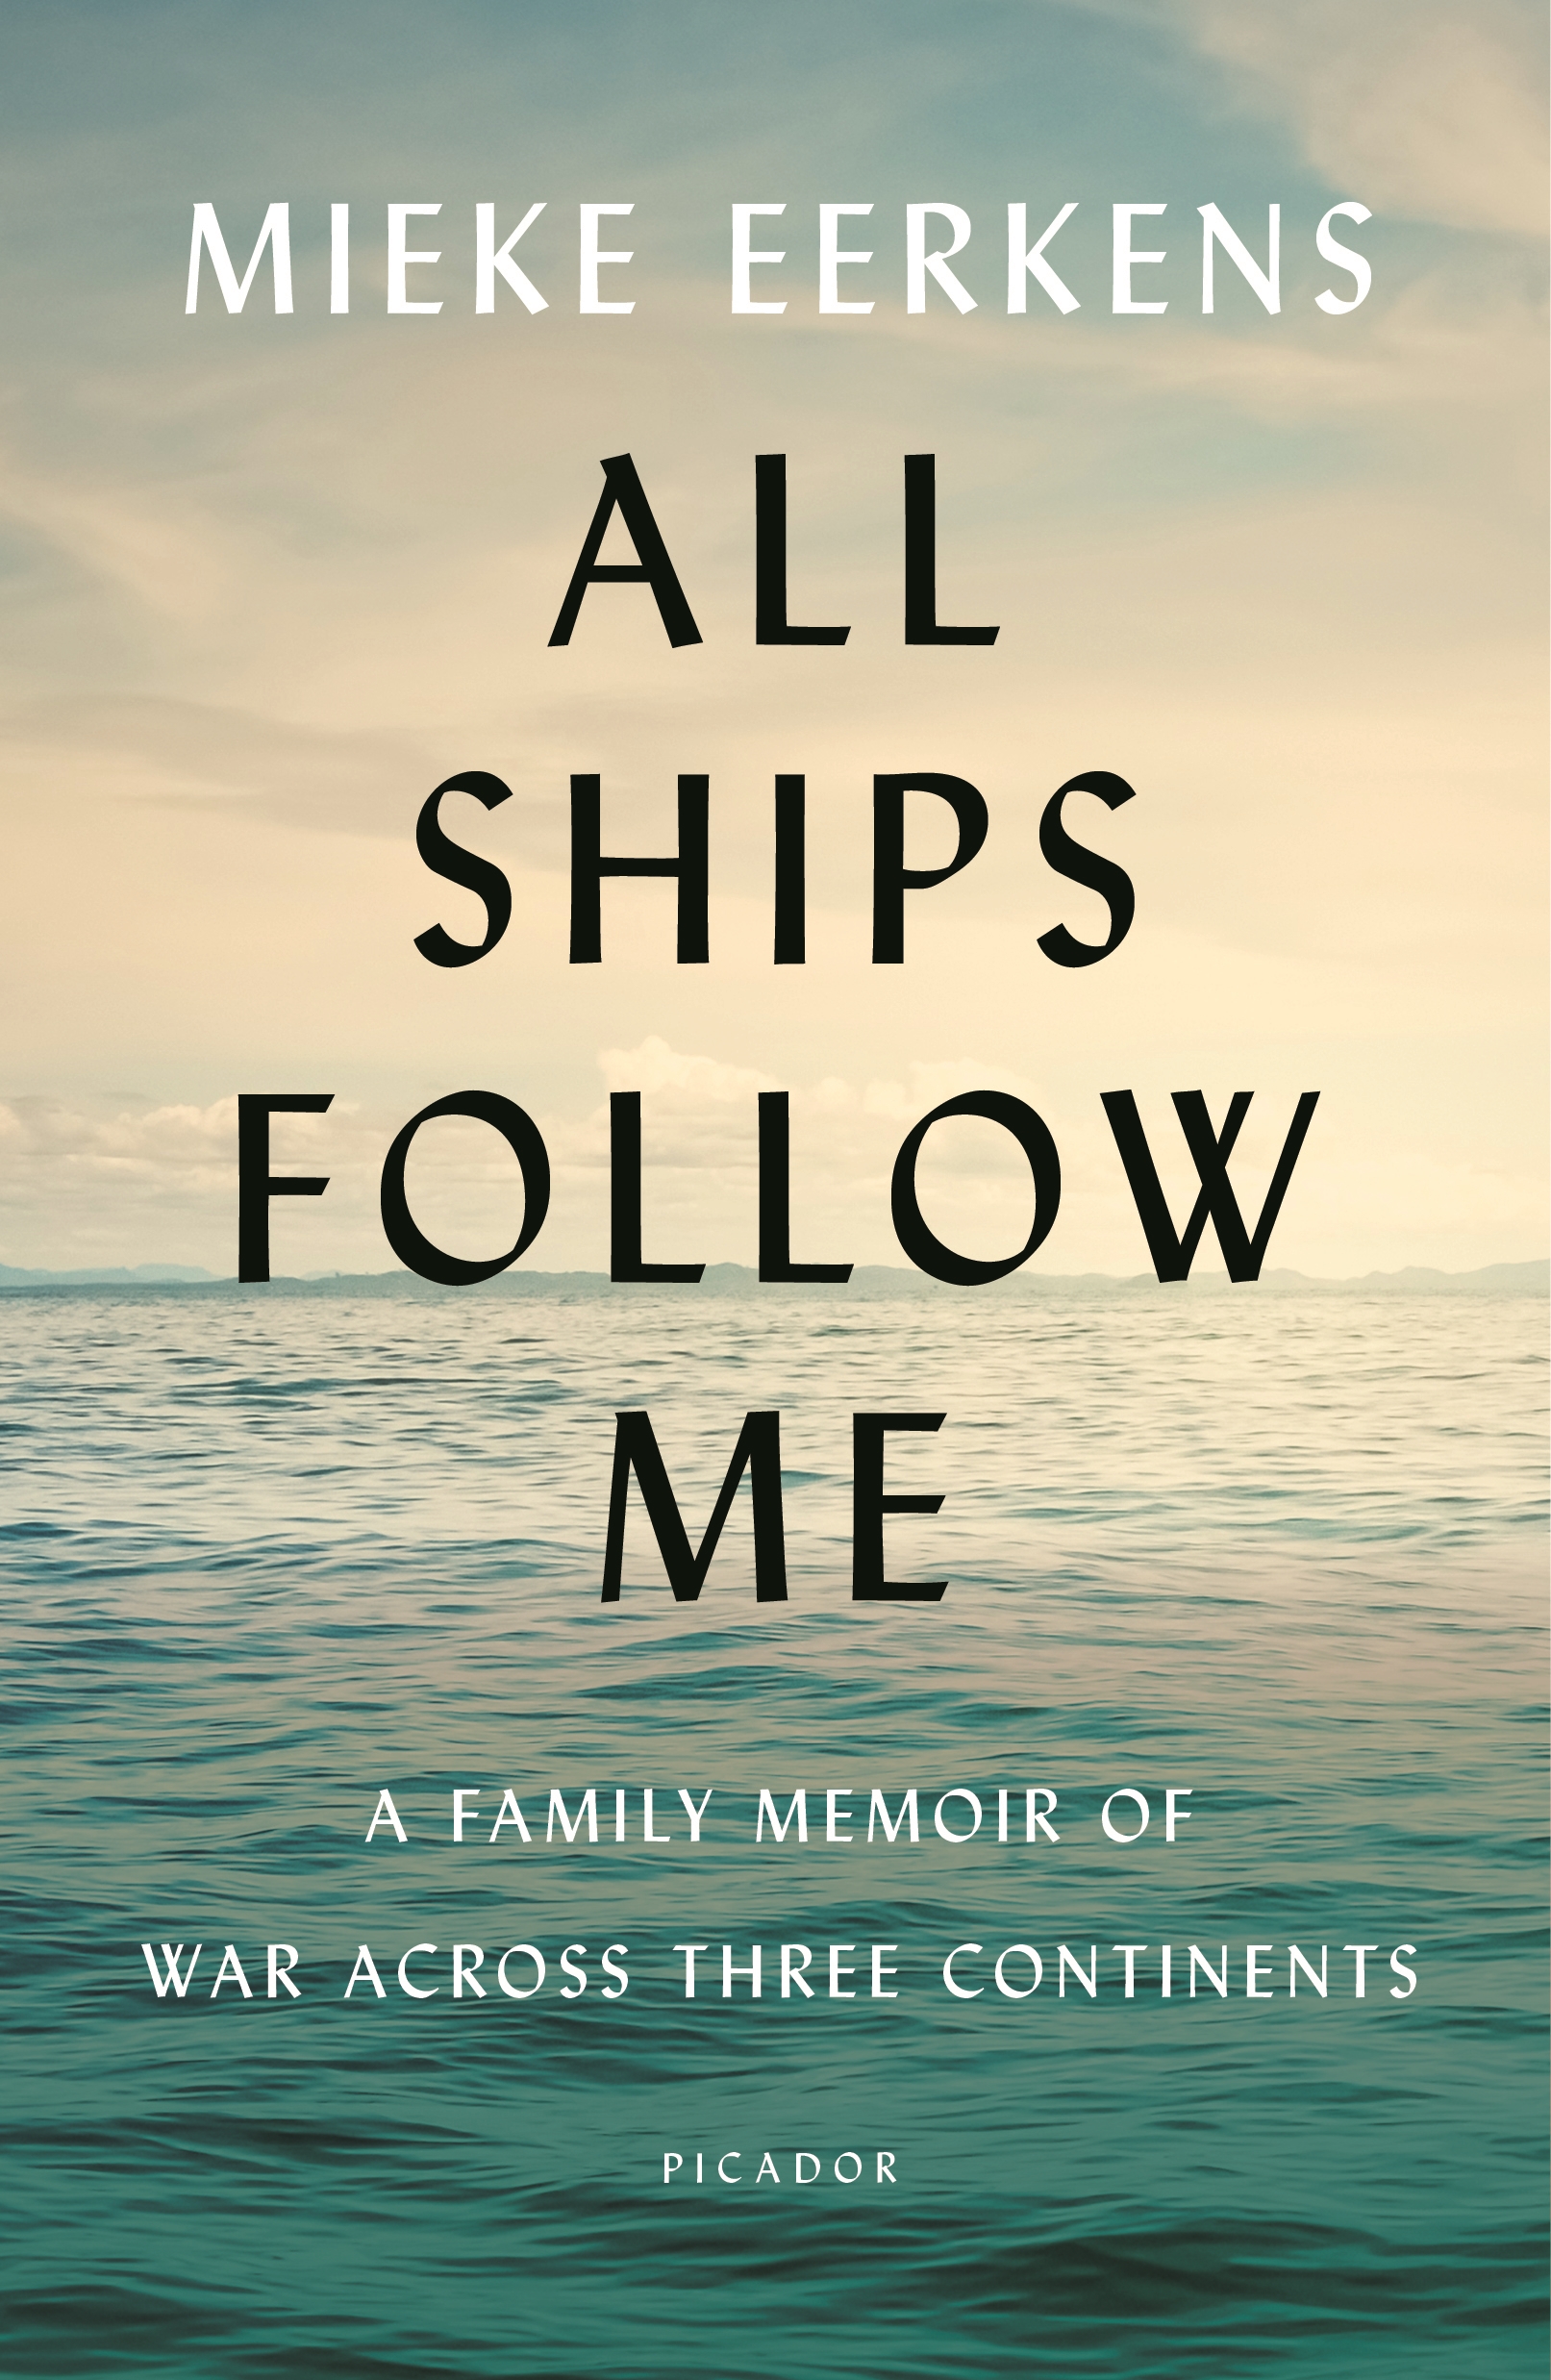 Book “All Ships Follow Me” by Mieke Eerkens — April 14, 2020